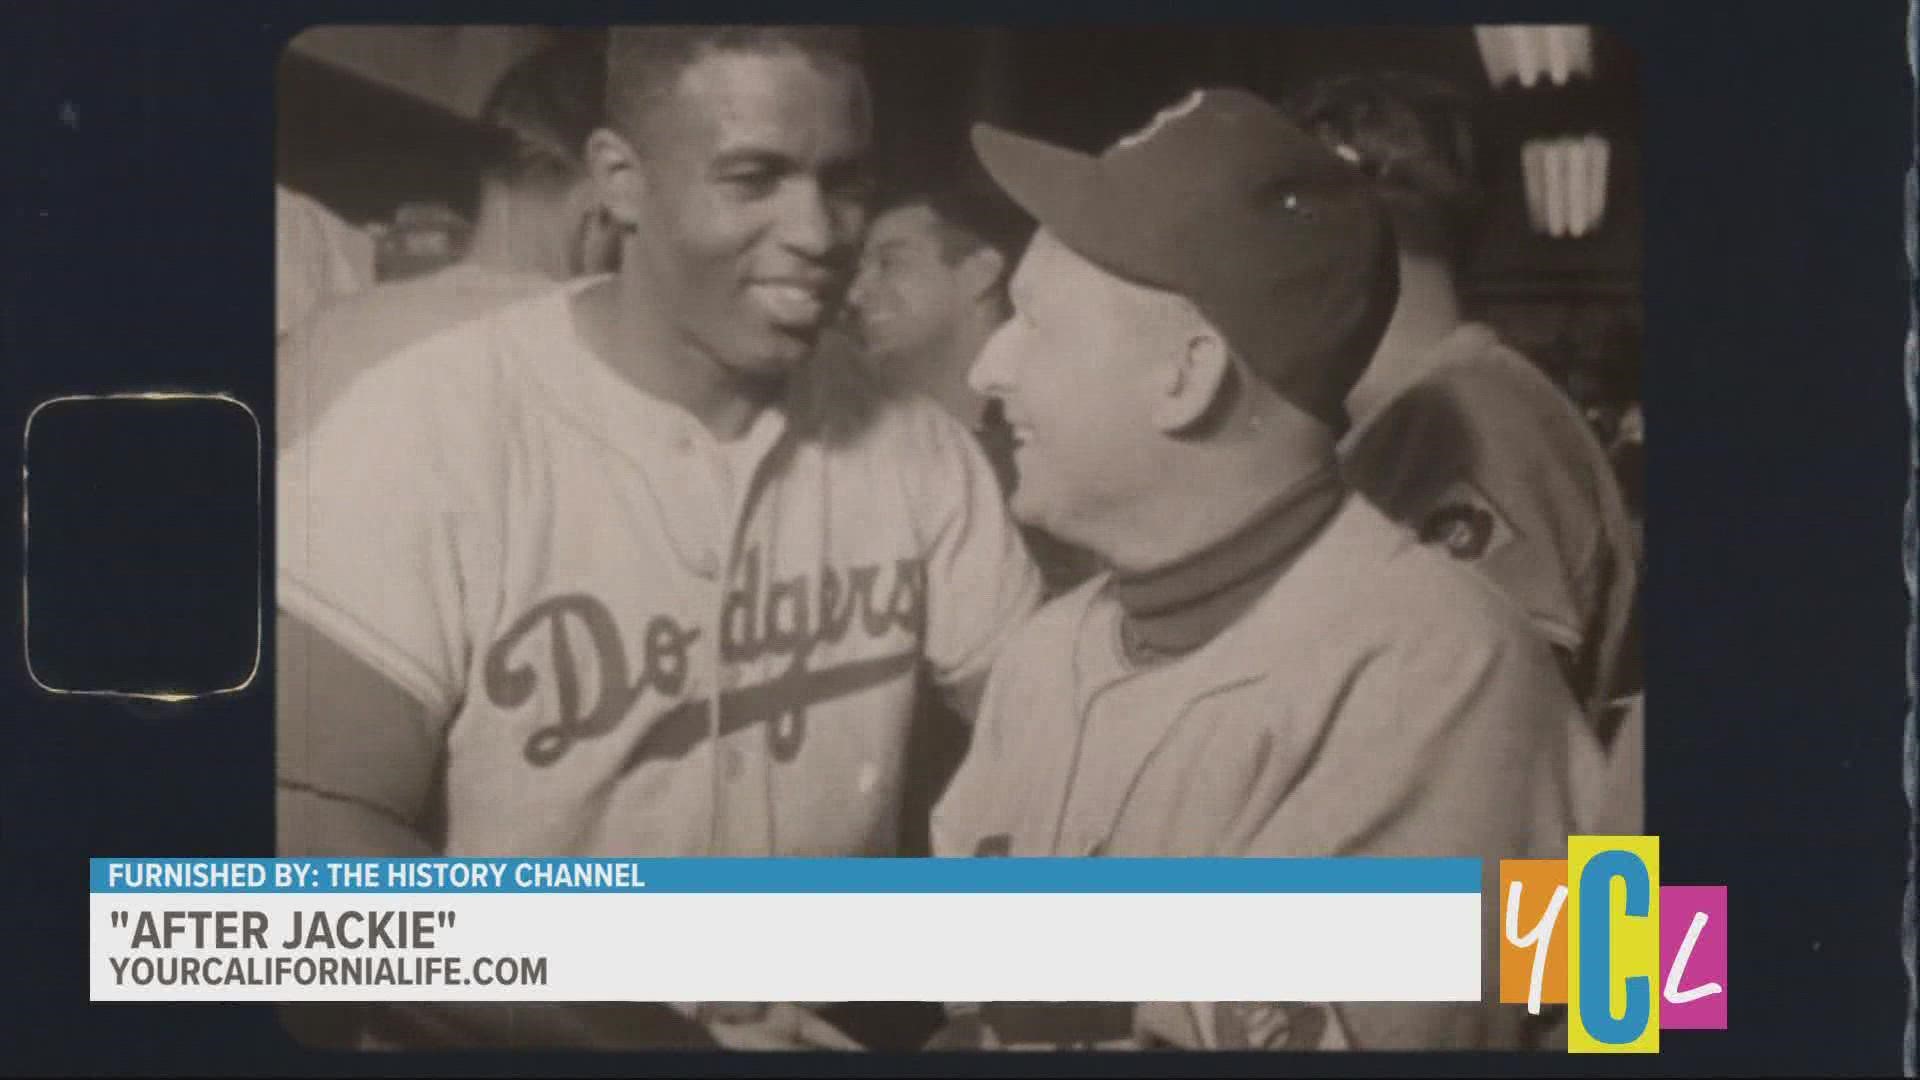 Learn the untold story of the next generation of Black baseball players who fought for racial equity in the sport after Jackie Robinson in a new documentary.